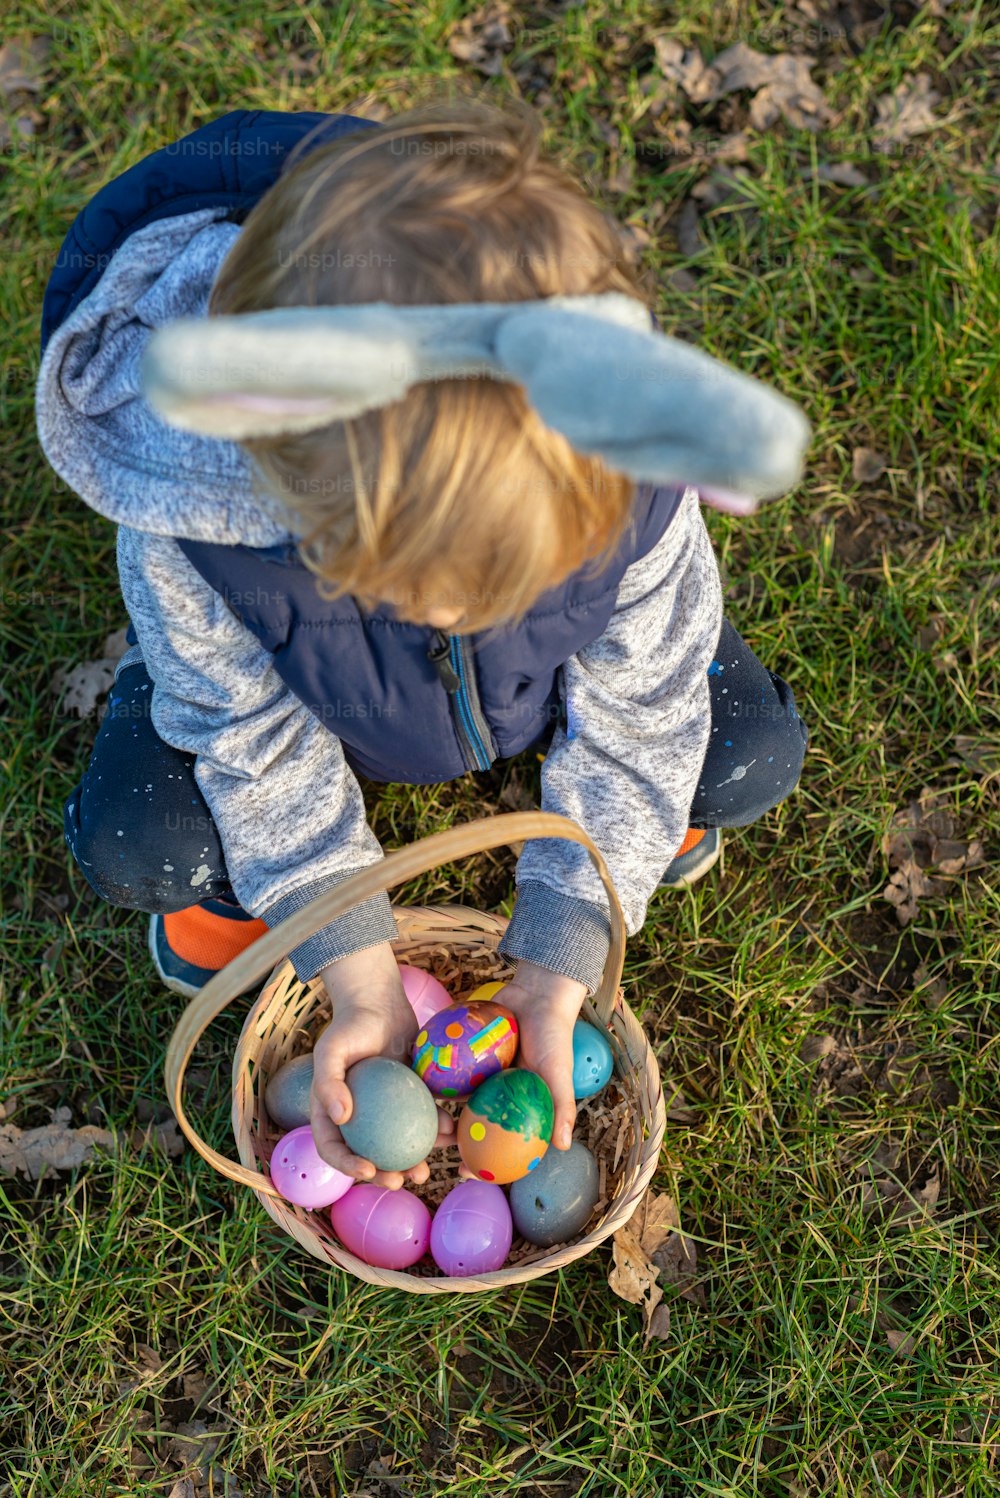 a little boy playing with a basket of eggs